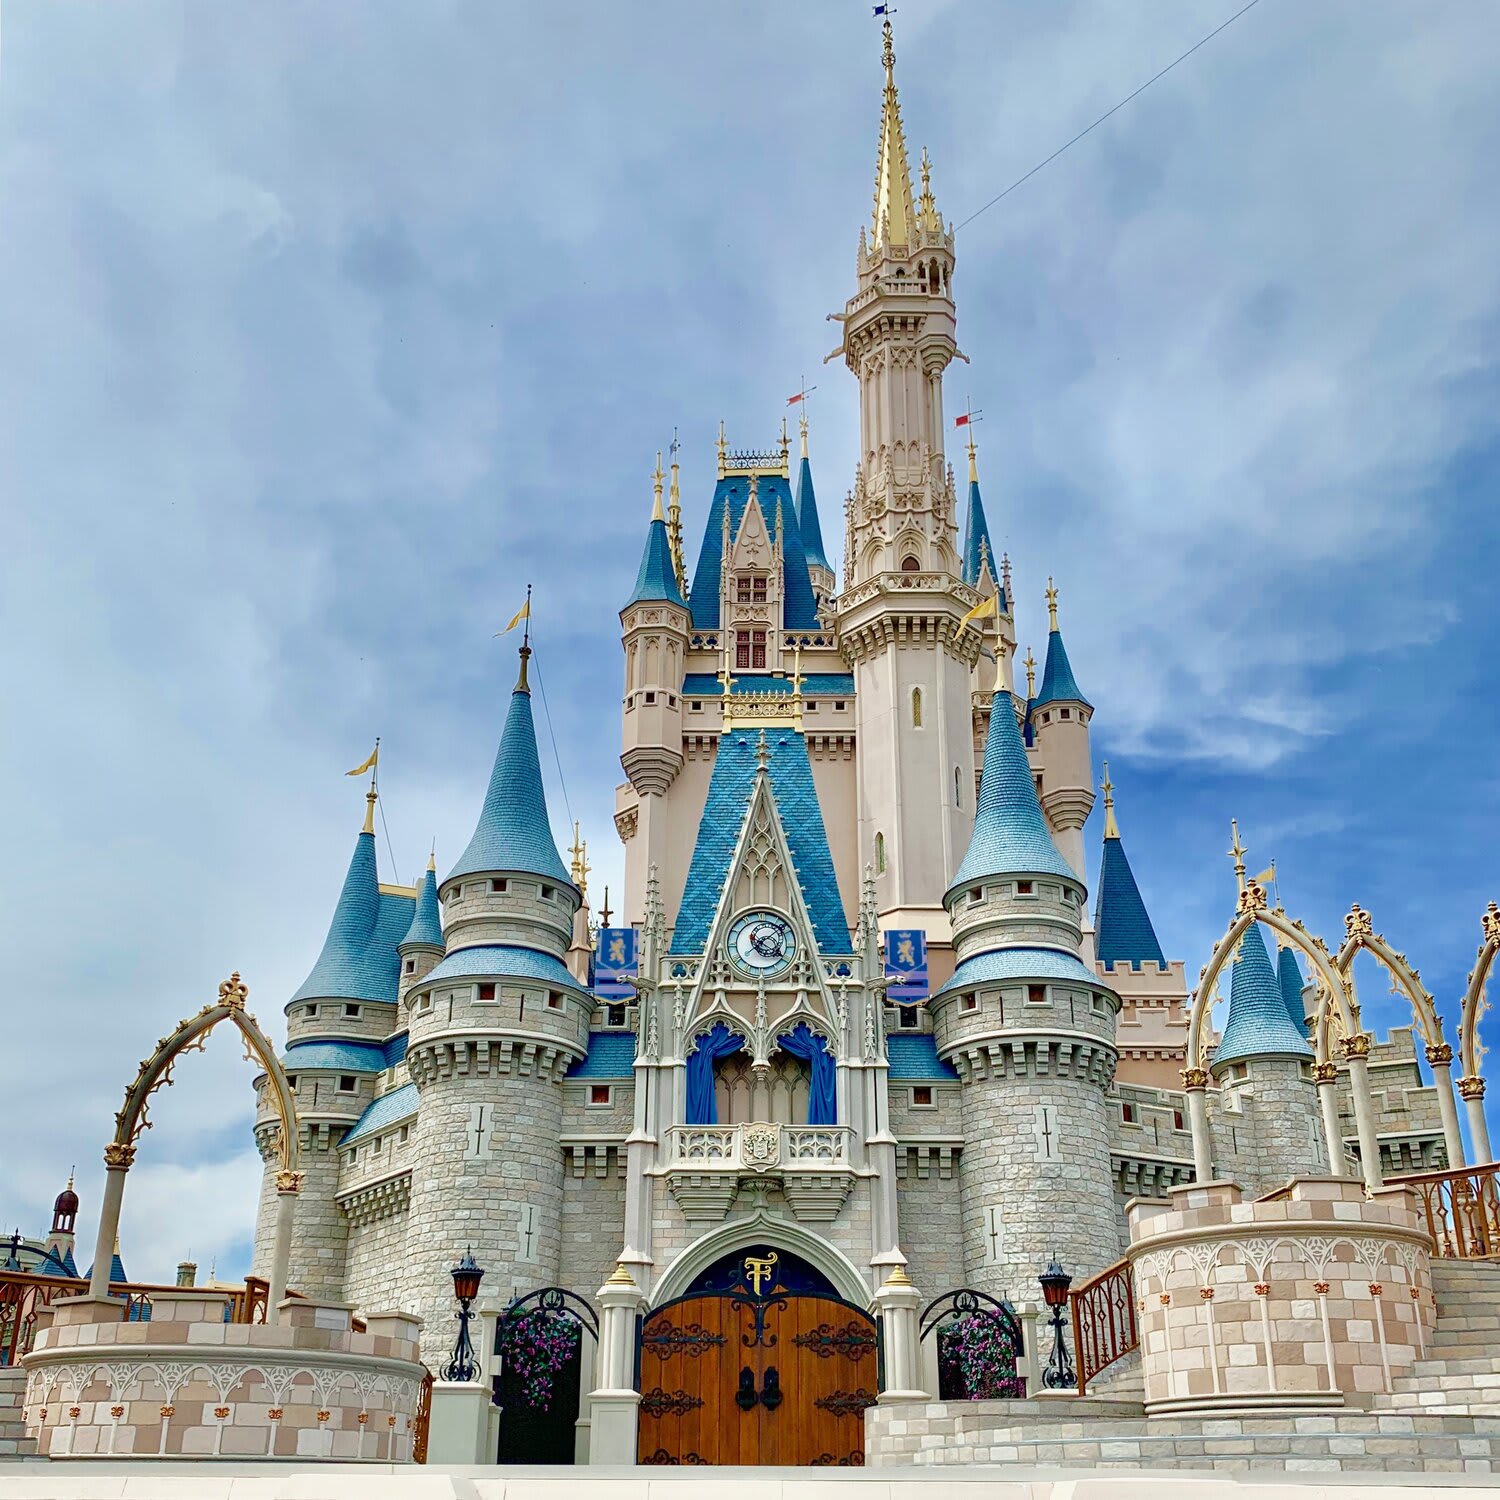 The autograph book your family needs for a Disney trip